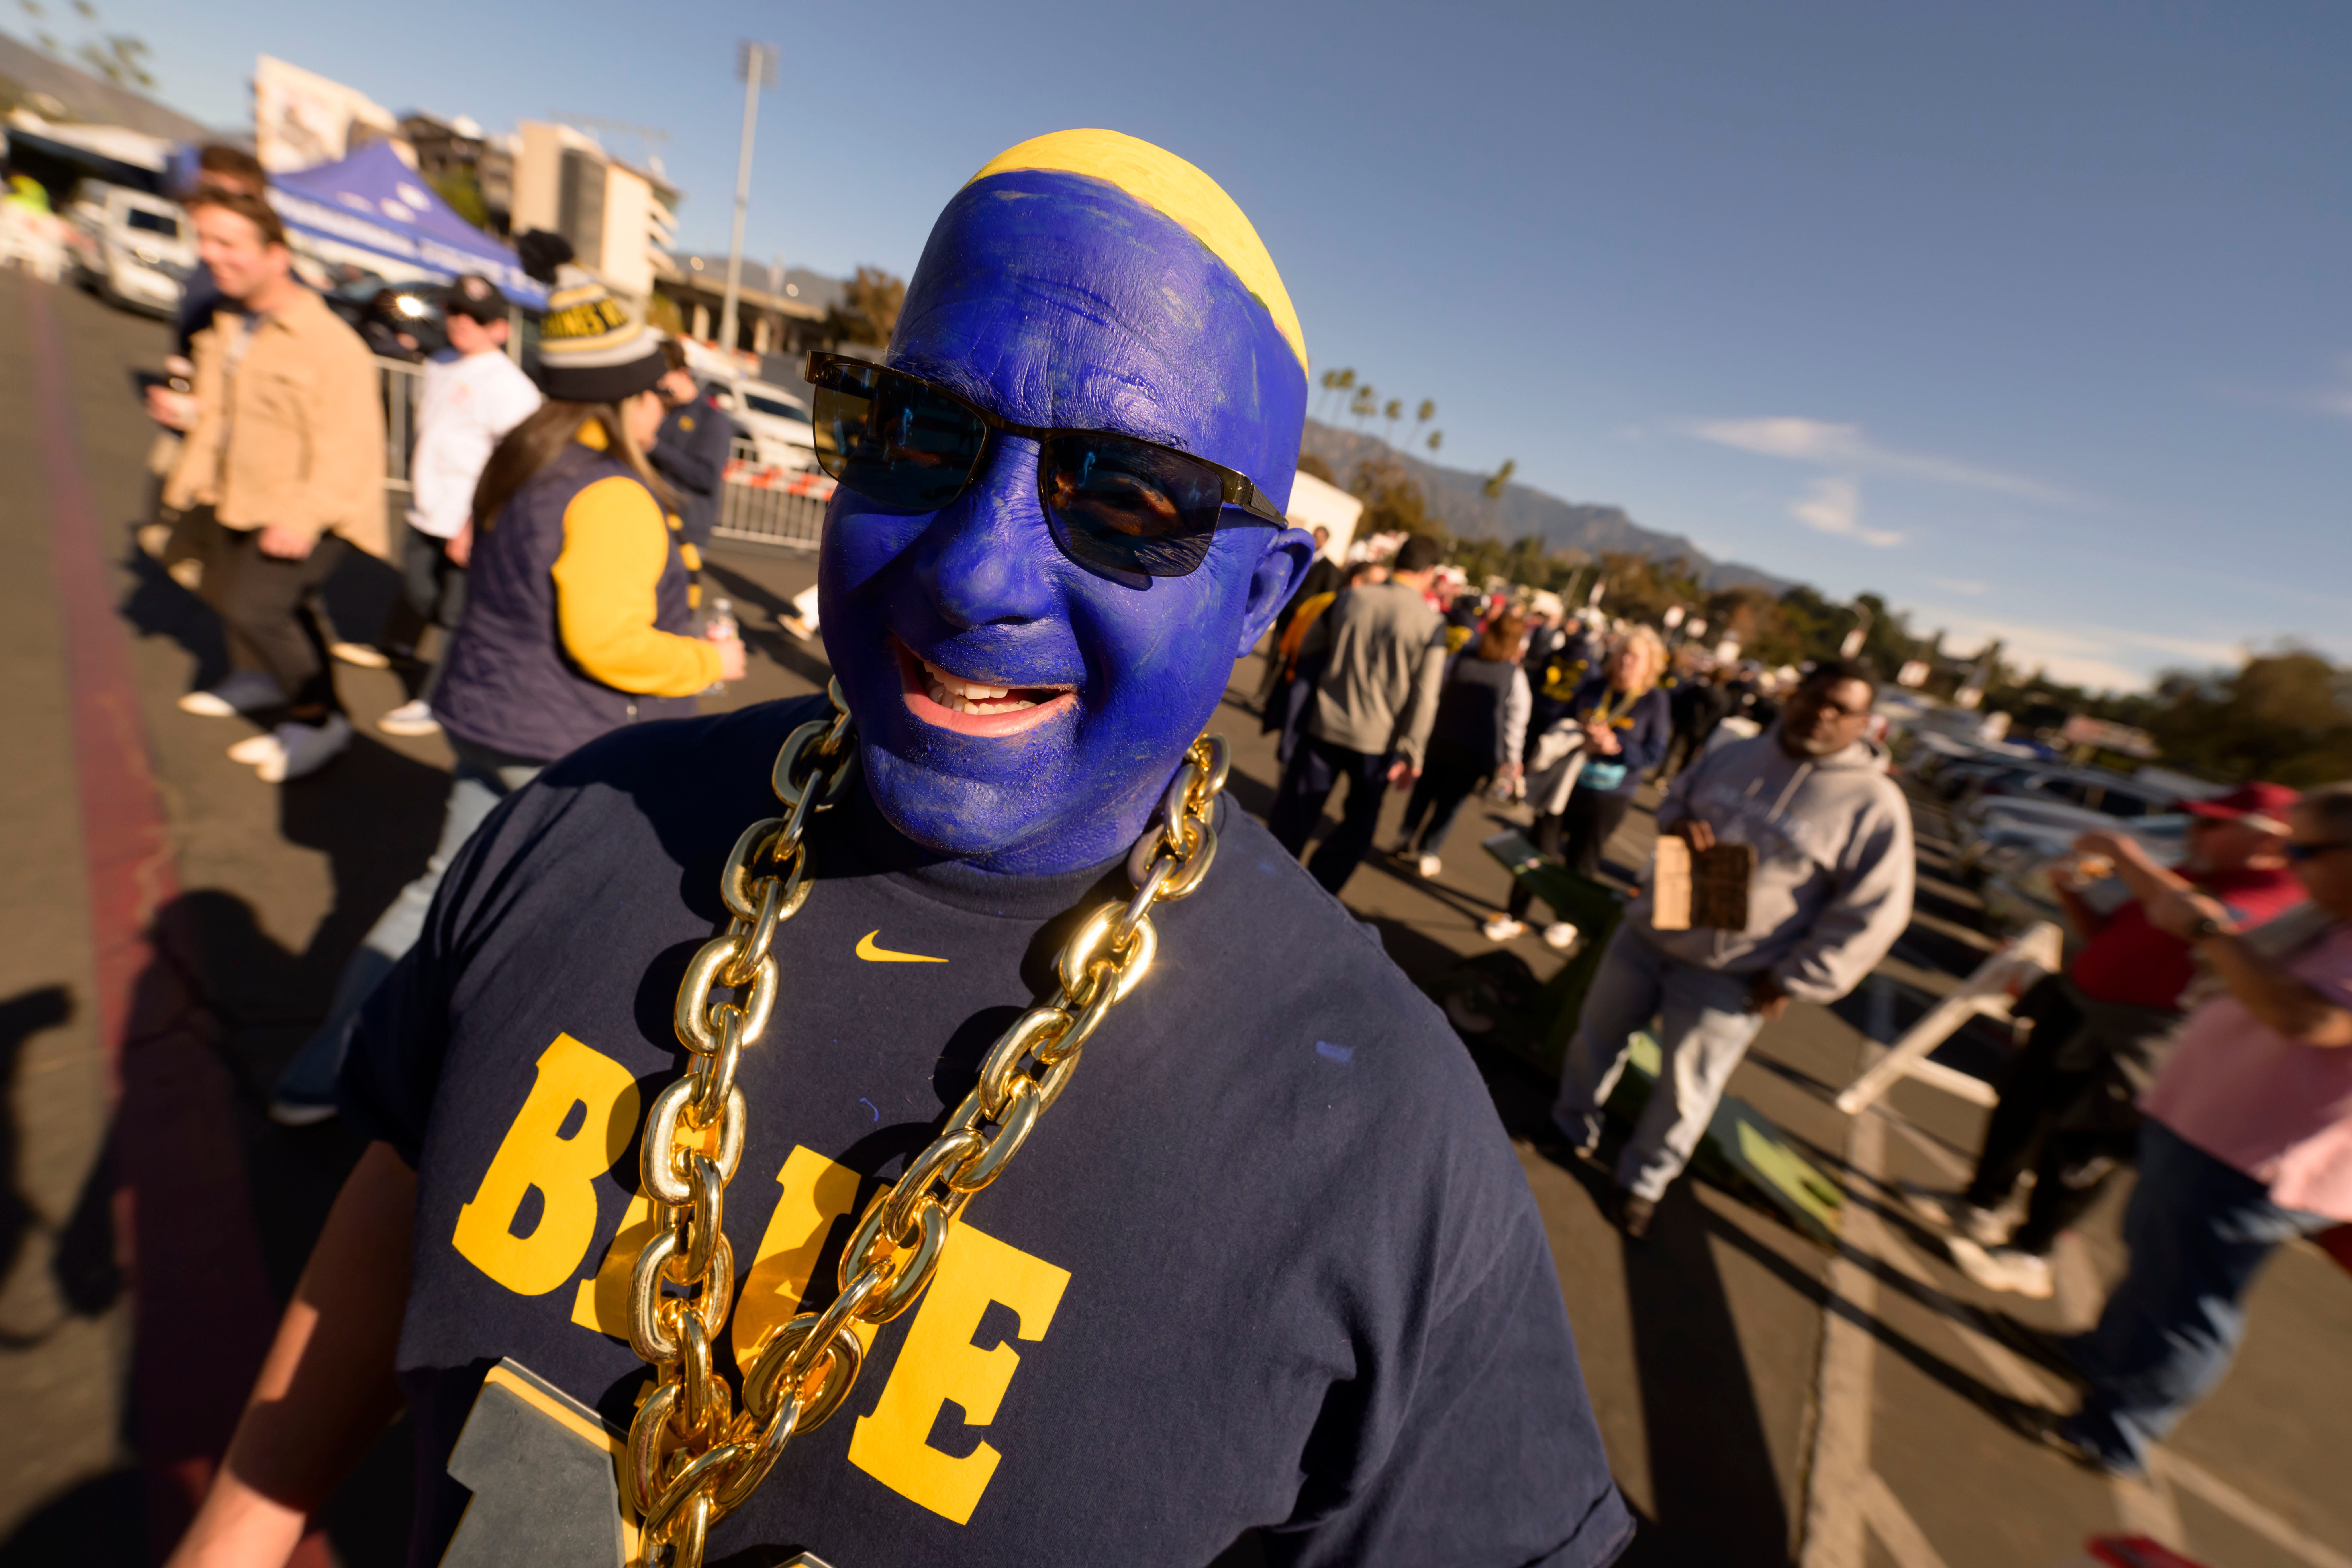 Detroit native Martin Sacco, now living in Pensacola, Florida, wears blue face paint while wandering around before the start of the Rose Bowl, in Pasadena, California, on Jan. 1, 2024.